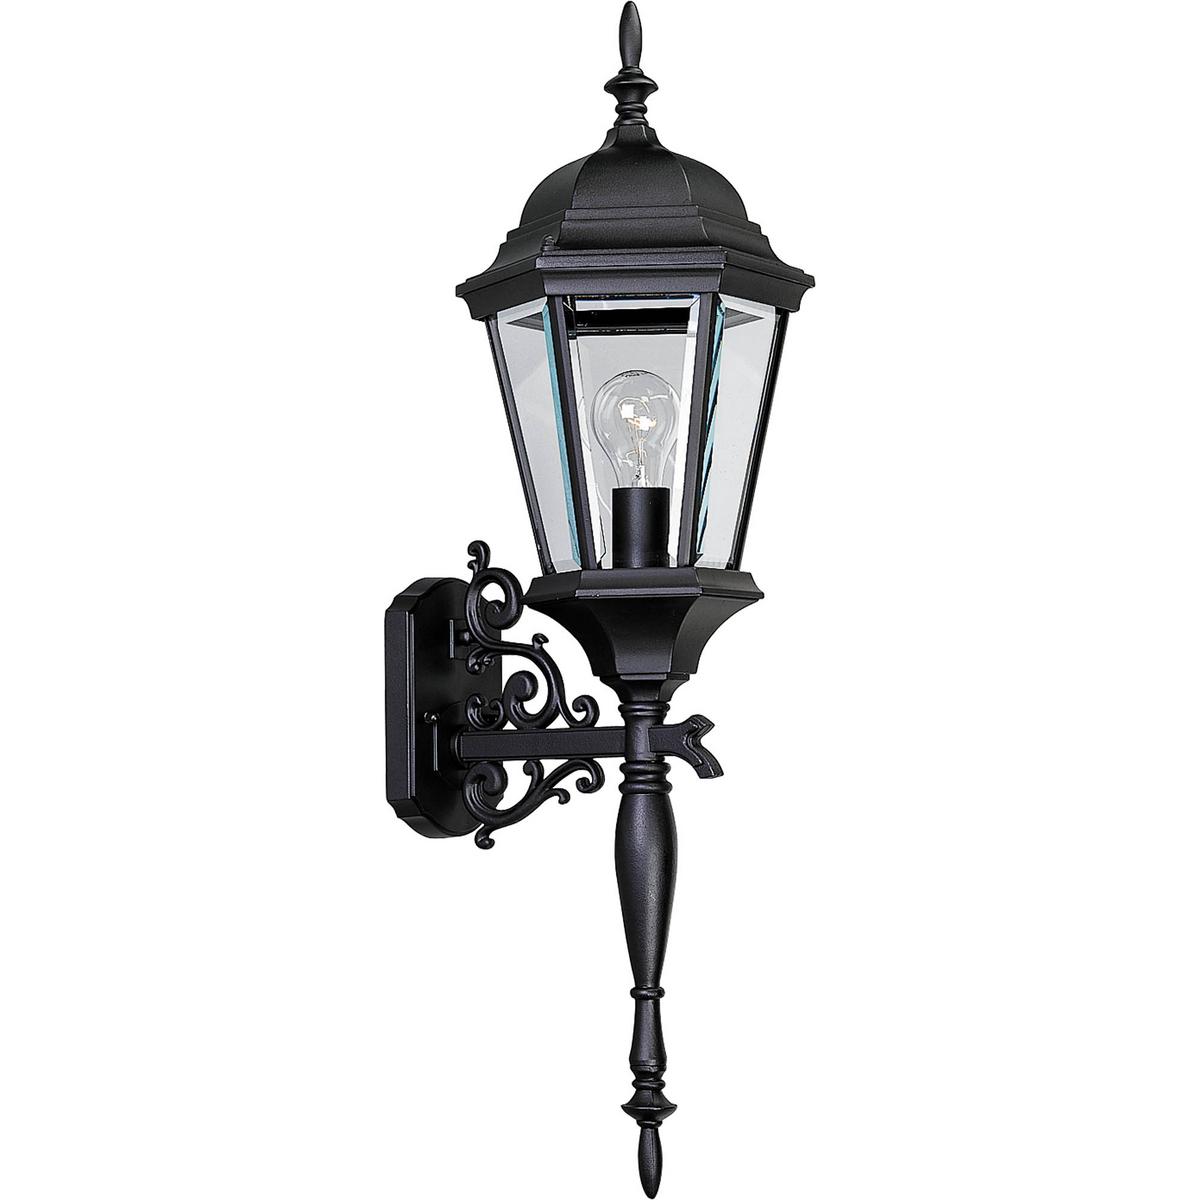 Hubbell P5684-31 The Welbourne collection features hexagonal framework with vine inspired scrolls and clear beveled glass panels. Cast aluminum construction with durable powder coat finish. One-light wall lantern. Use with or without tail.  ; Hexagonal framework. ; Vine i